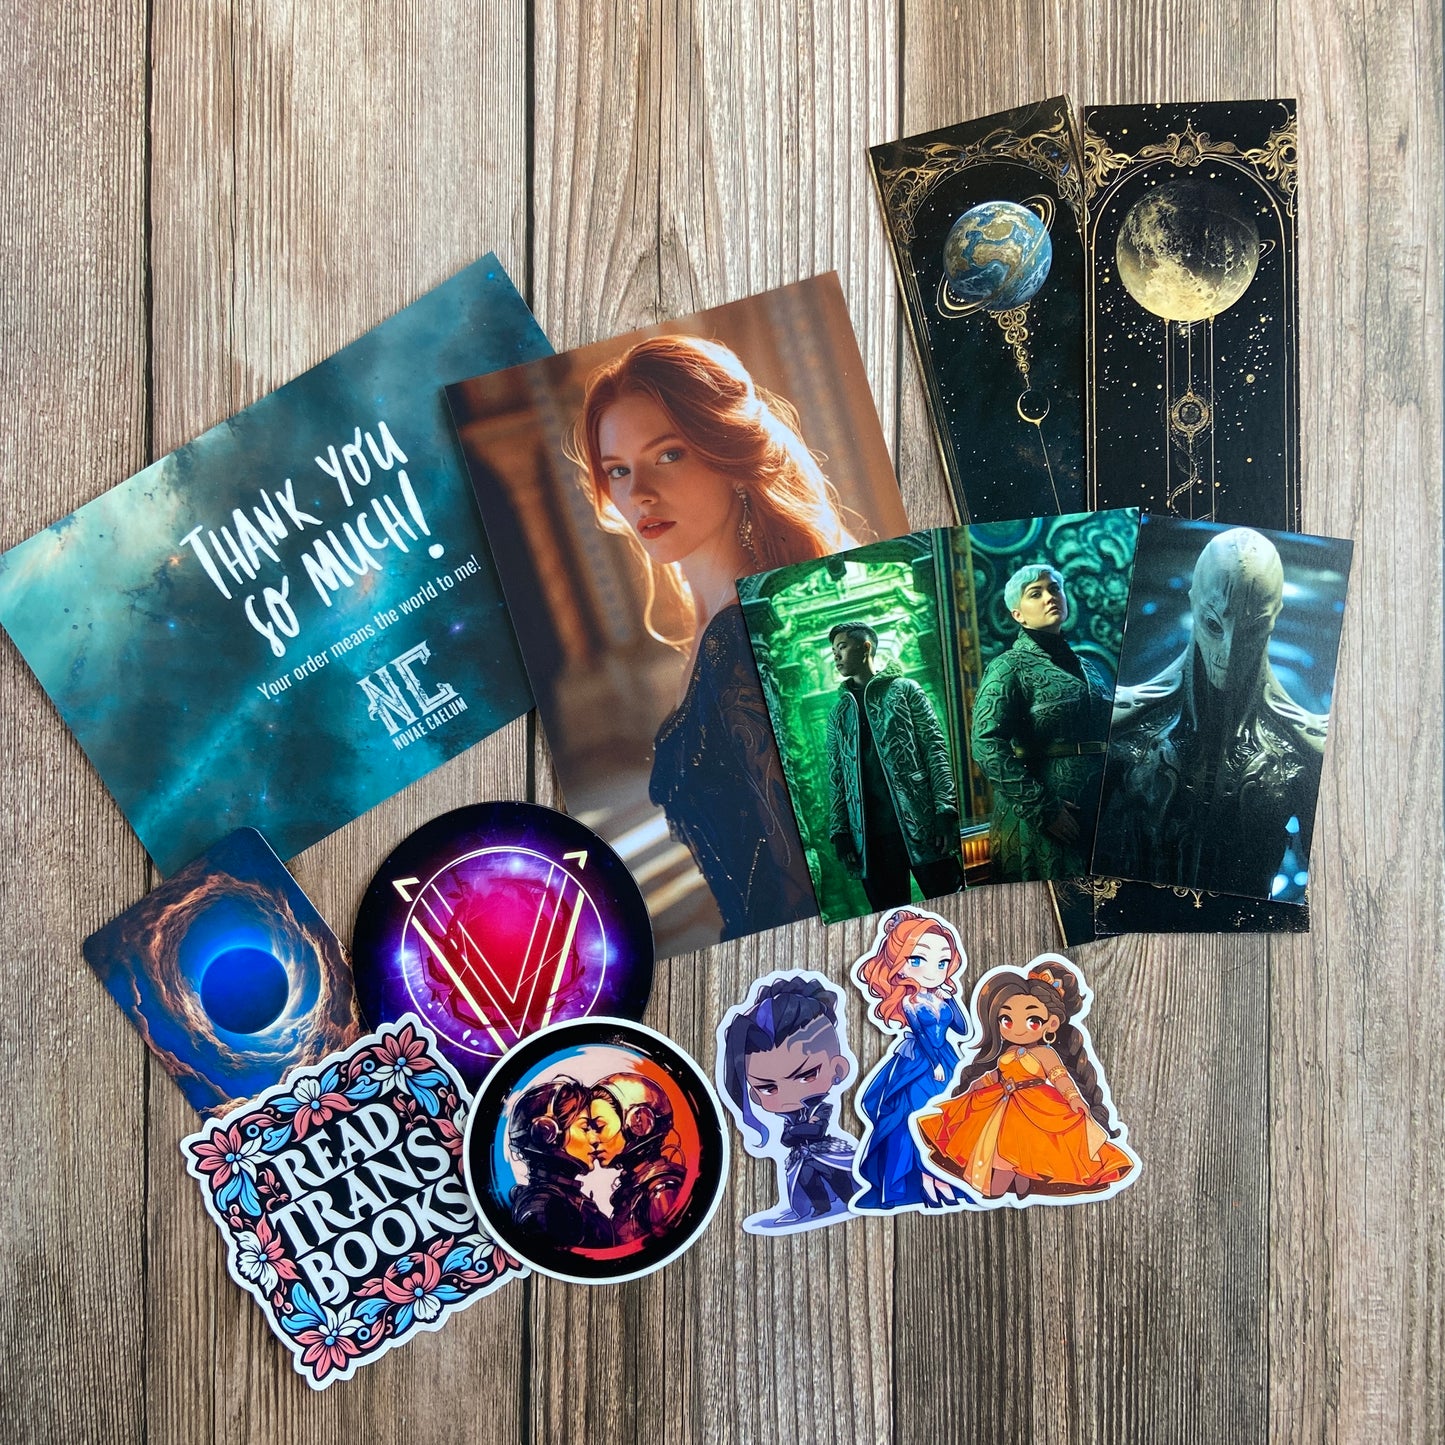 A collection of Novae Caelum's SIGNED Paperback Deluxe Swag Bundle: The Stars and Green Magics (Books 1-5), including bookmarks, stickers, and art prints, arranged on a wooden surface.